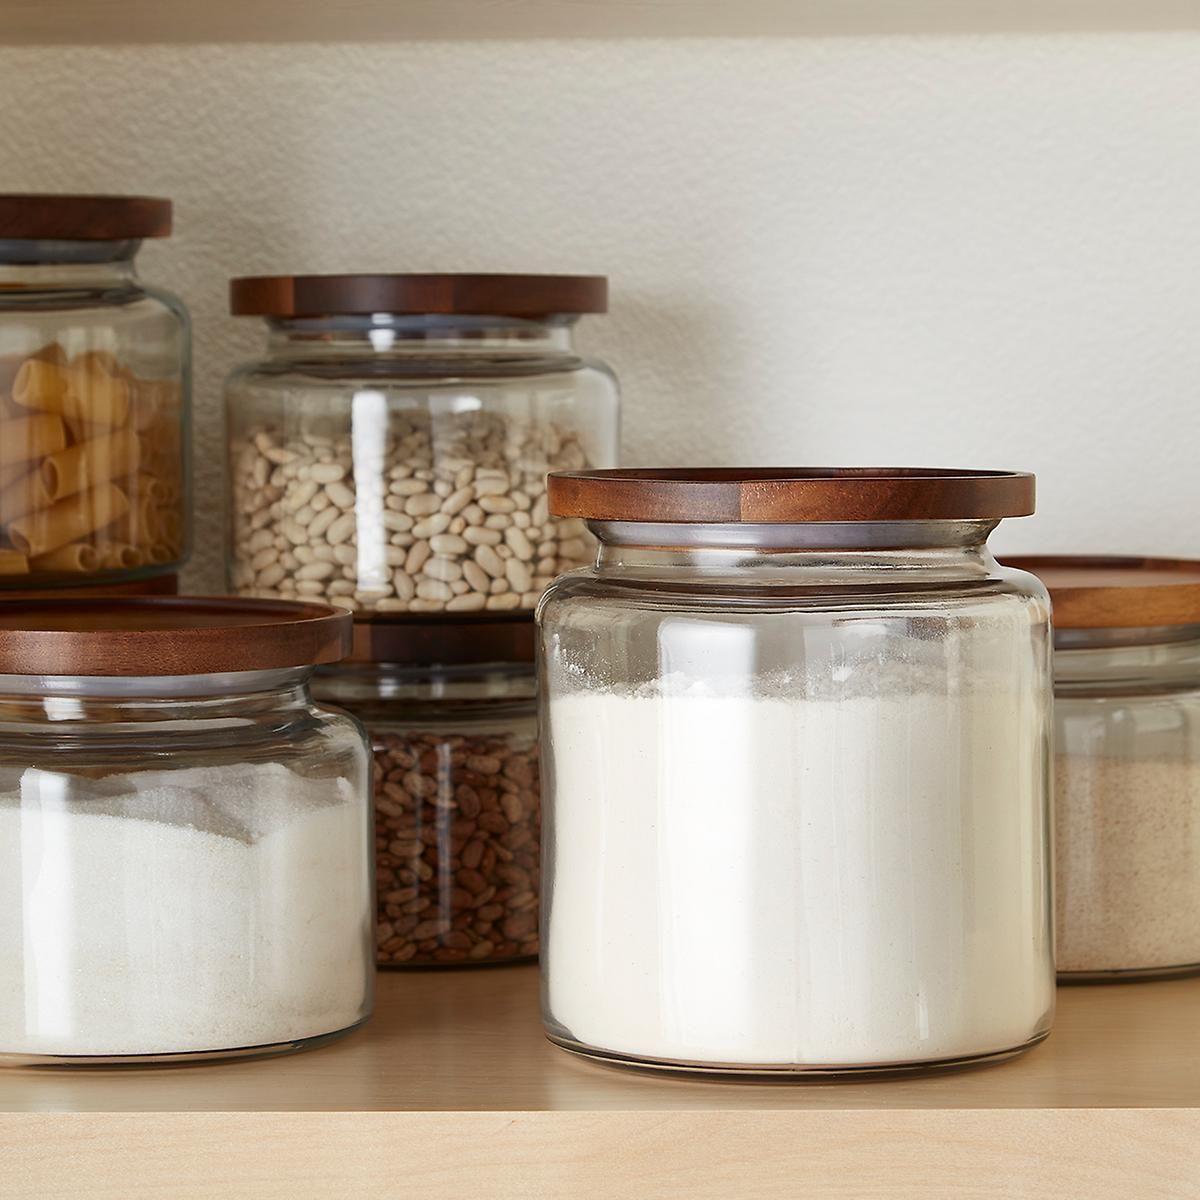 Anchor Hocking Montana Glass Canisters with Acacia Lids | The Container Store